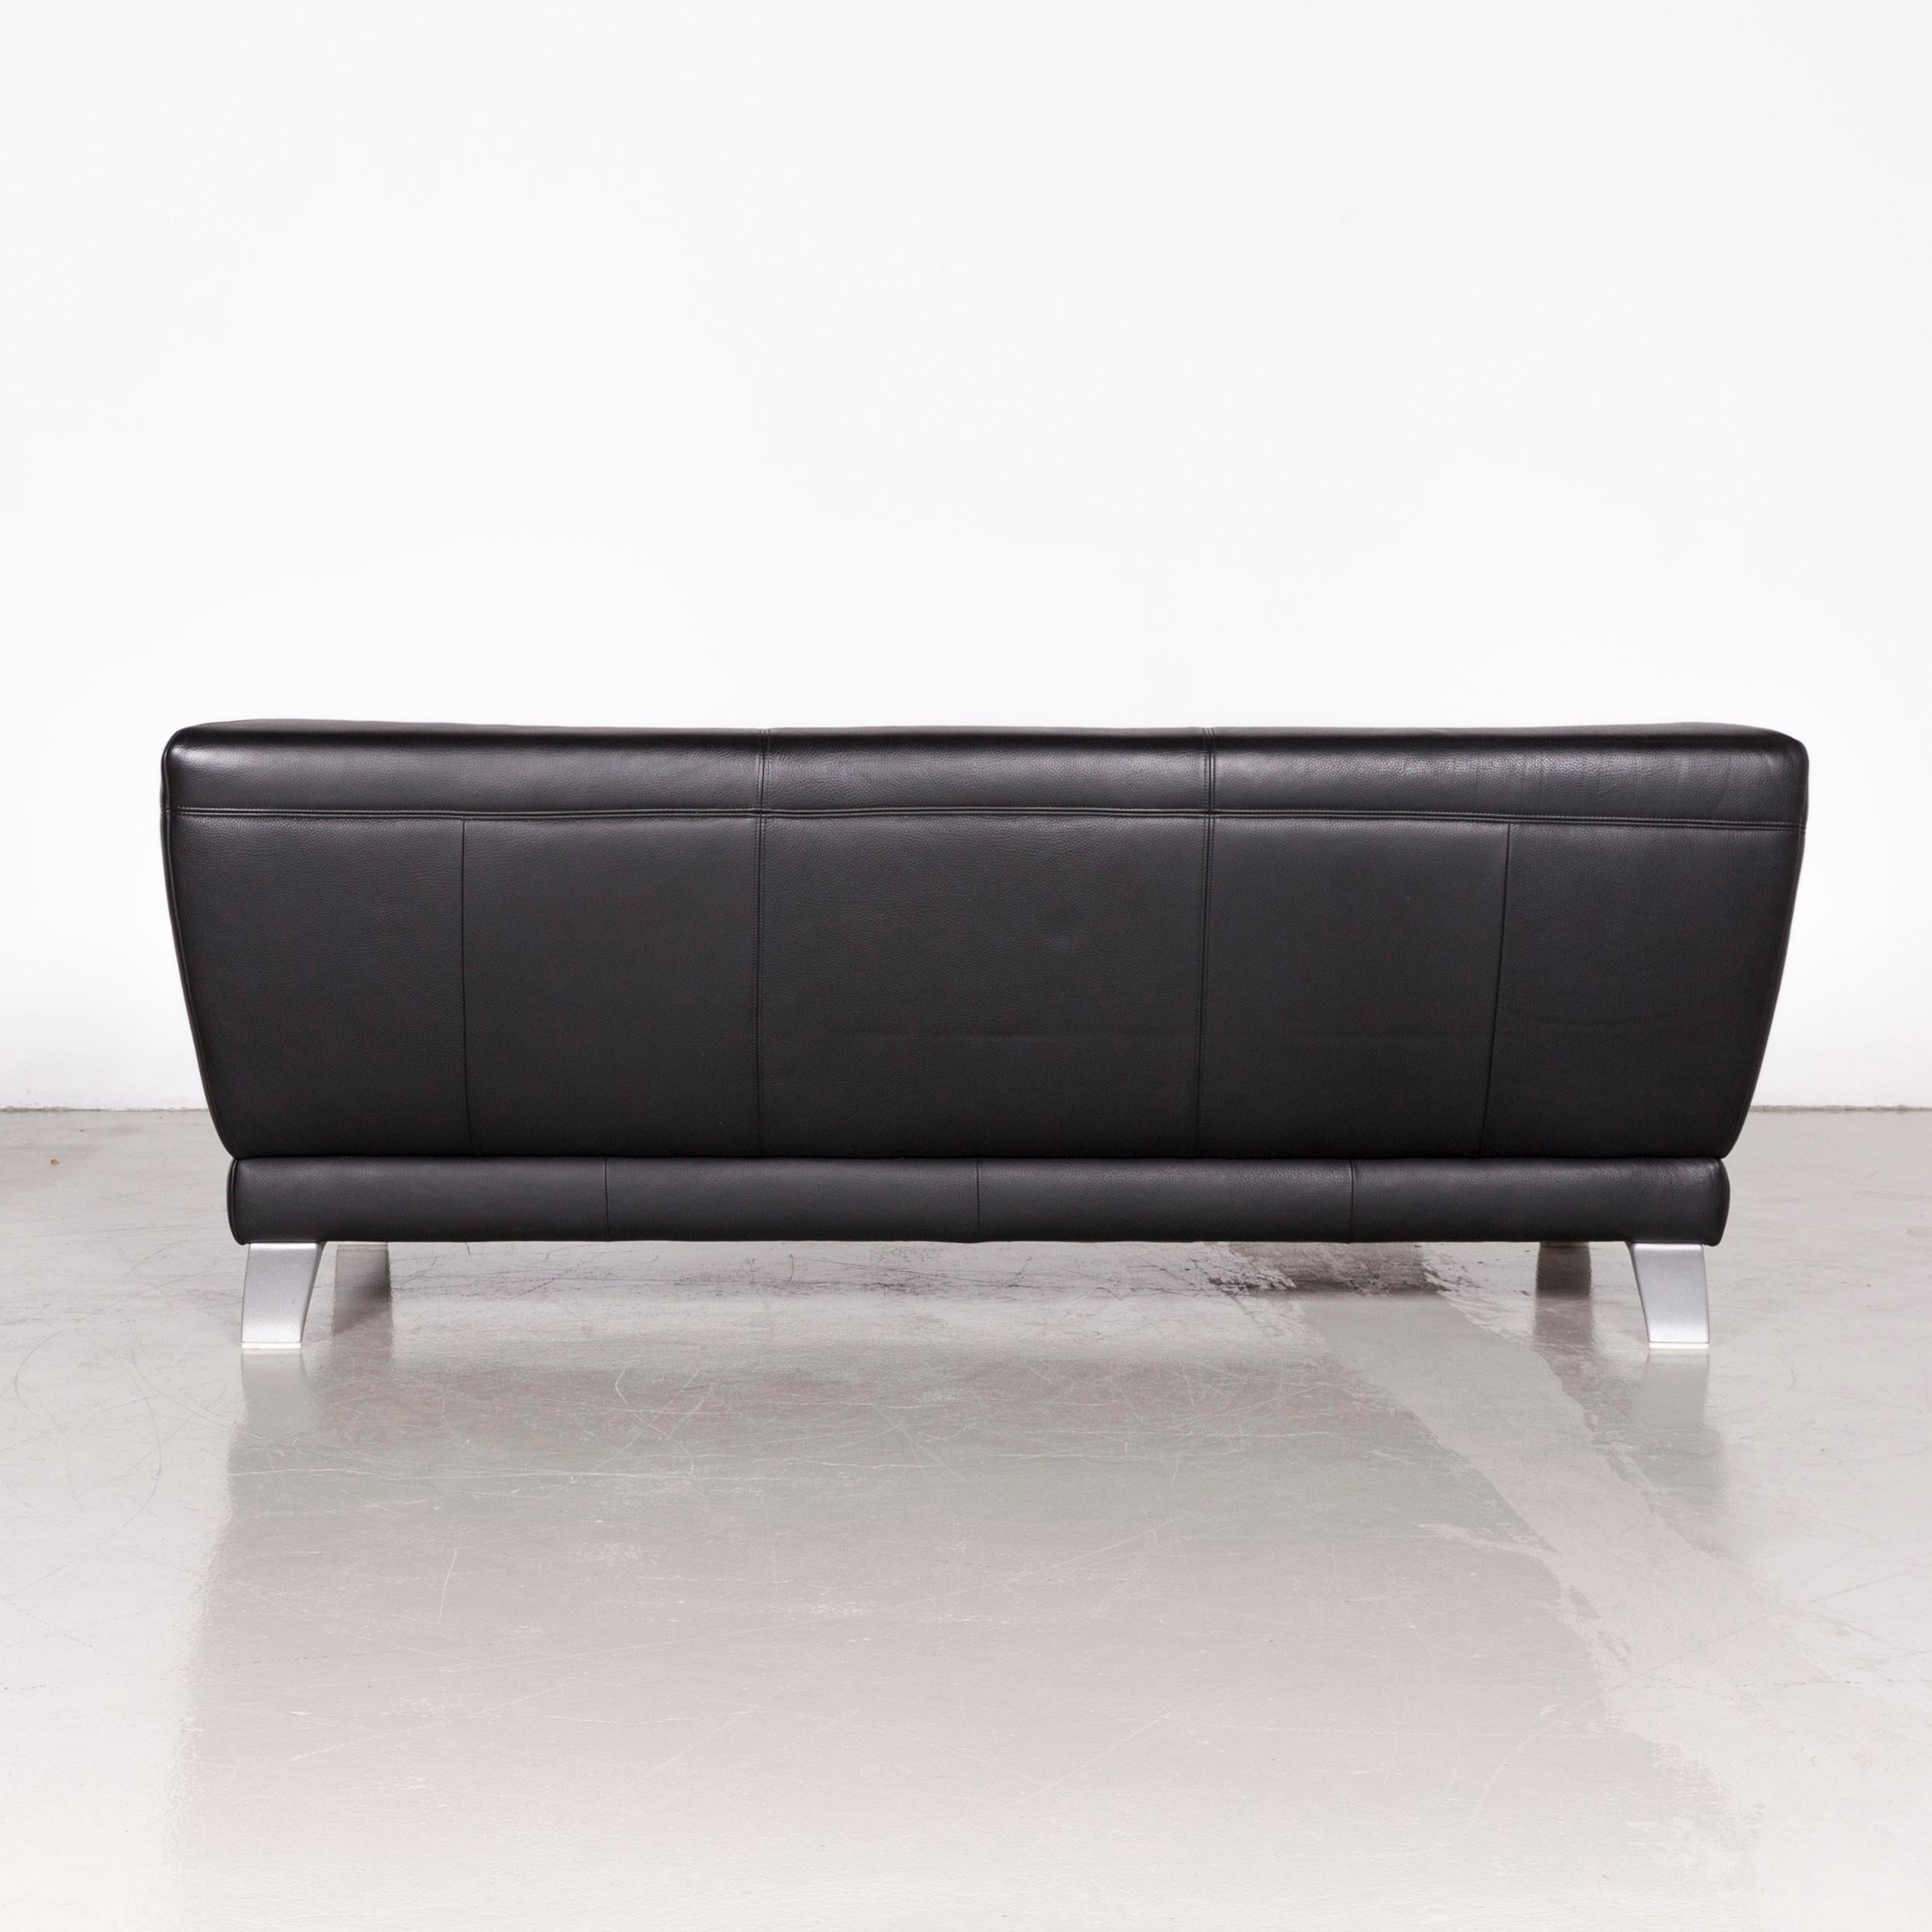 Rolf Benz 2300 Designer Sofa Black Two-Seat Leather Couch 2